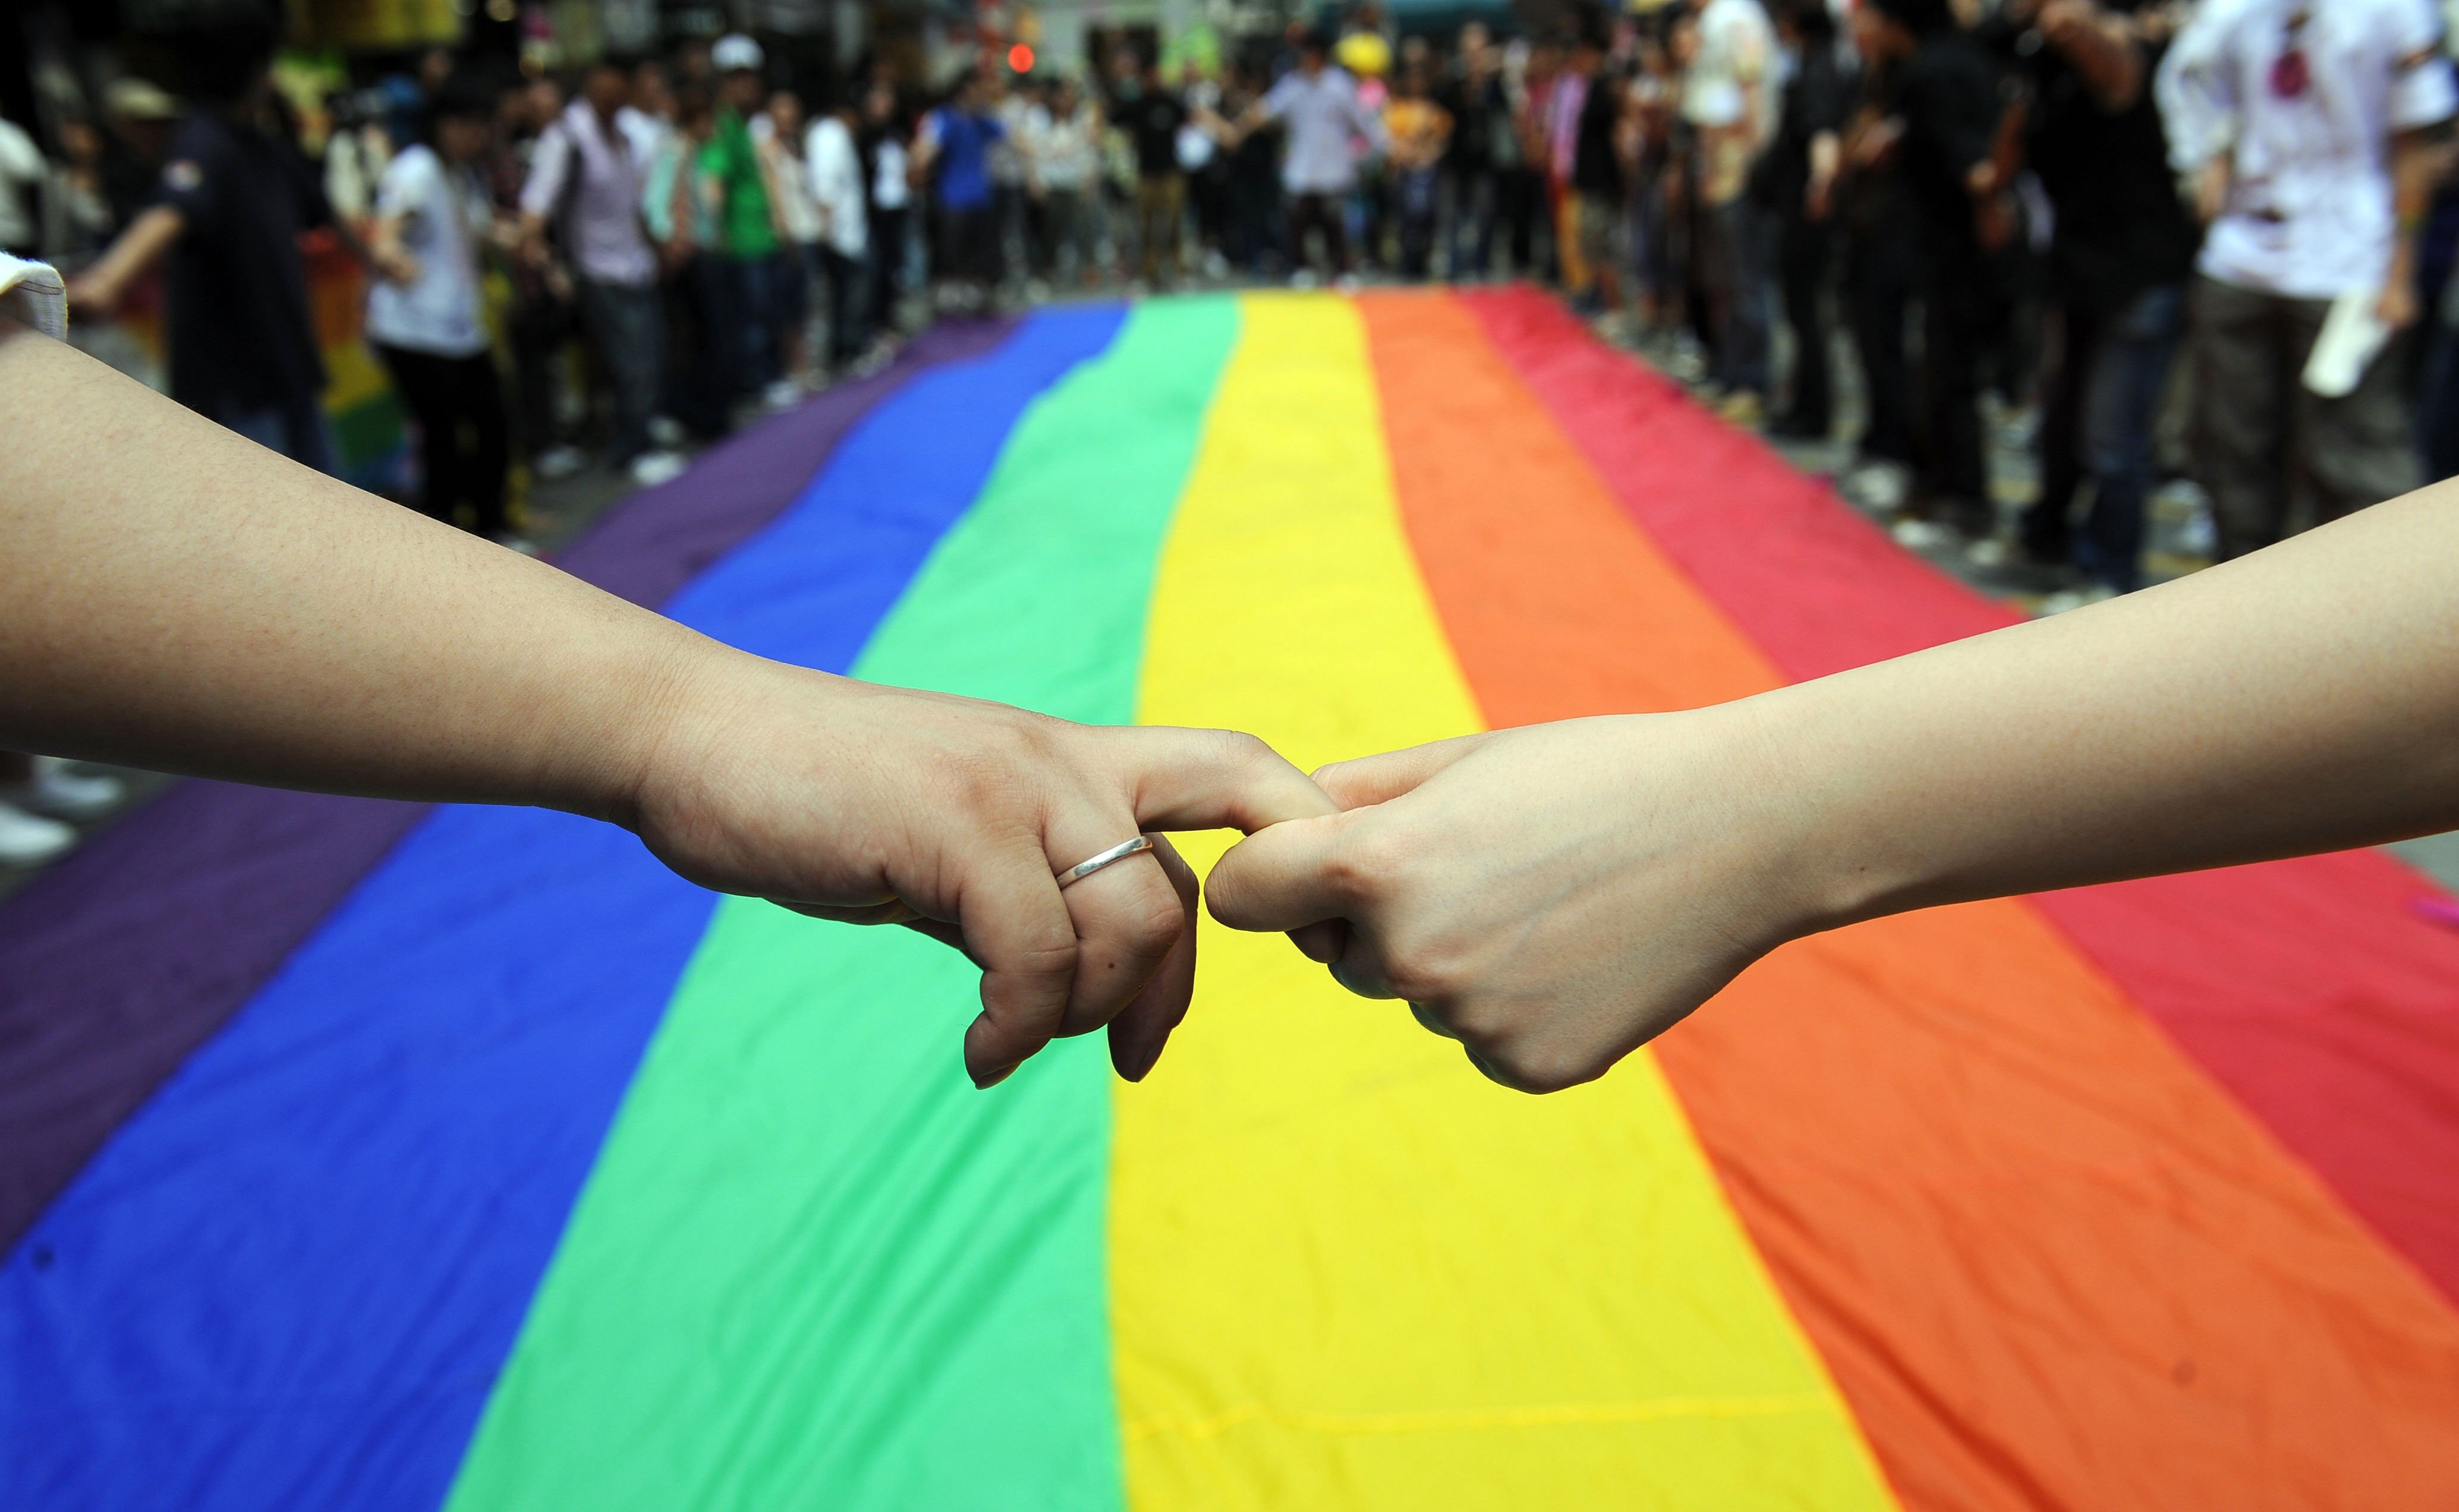 Activists form a human chain around a rainbow flag to mark the fourth annual International Day Against Homophobia in Hong Kong on May 18, 2008. Photo: AFP